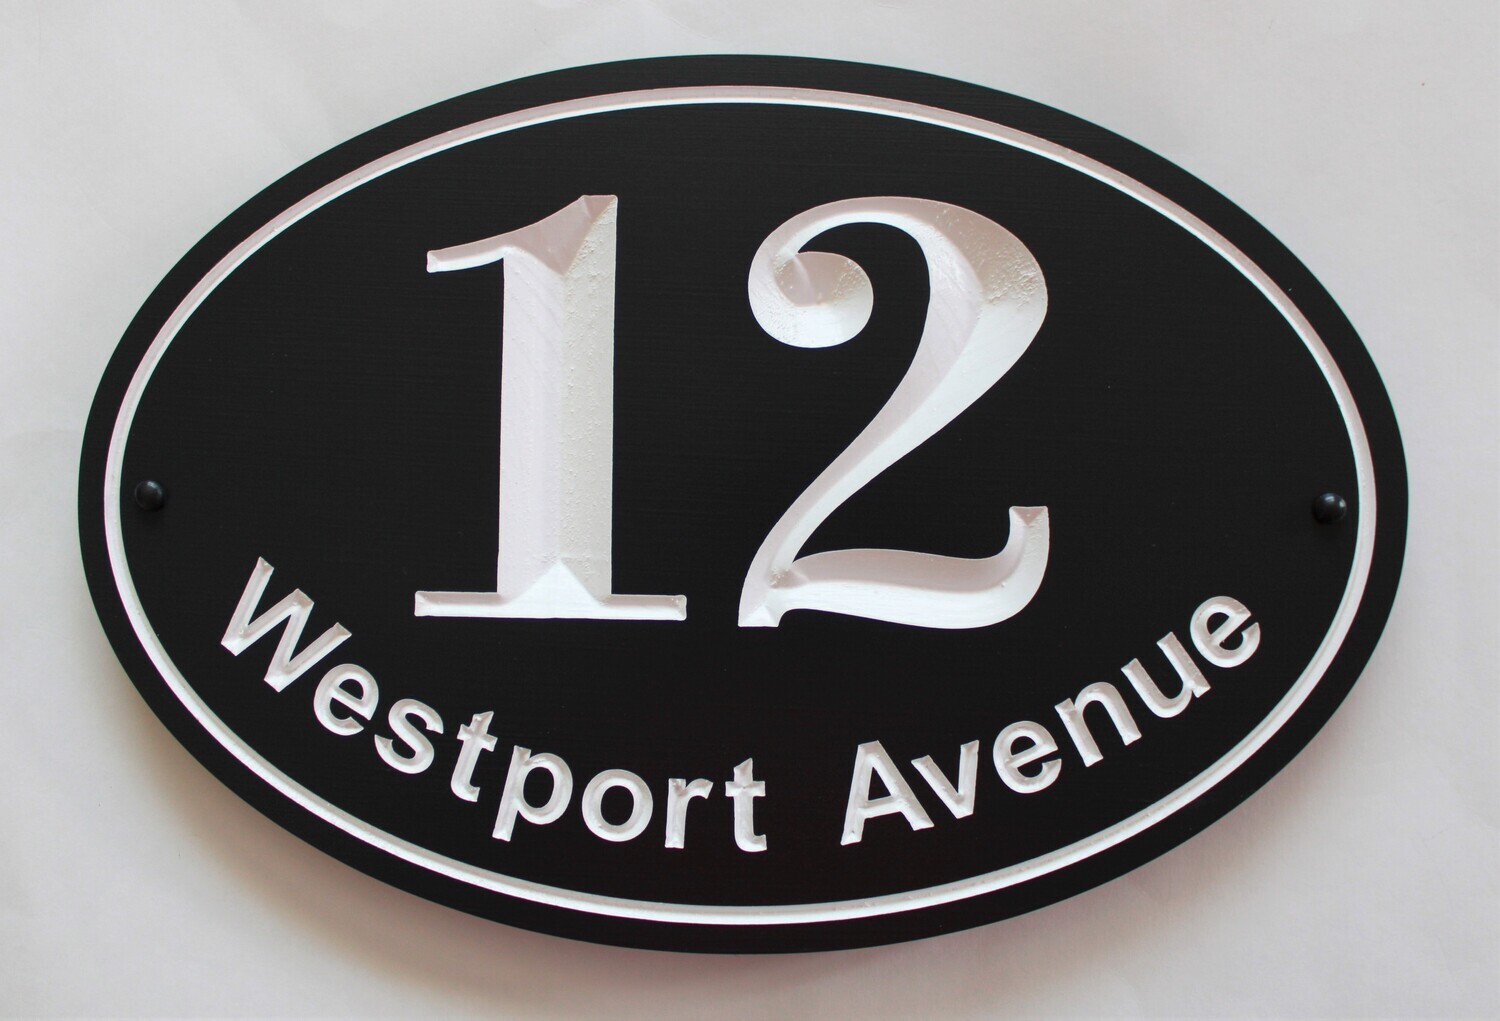 Custom Oval Address Sign - House Number Sign Painted With White Carving - Weather Resistant solid 3/4 inch thick PVC.